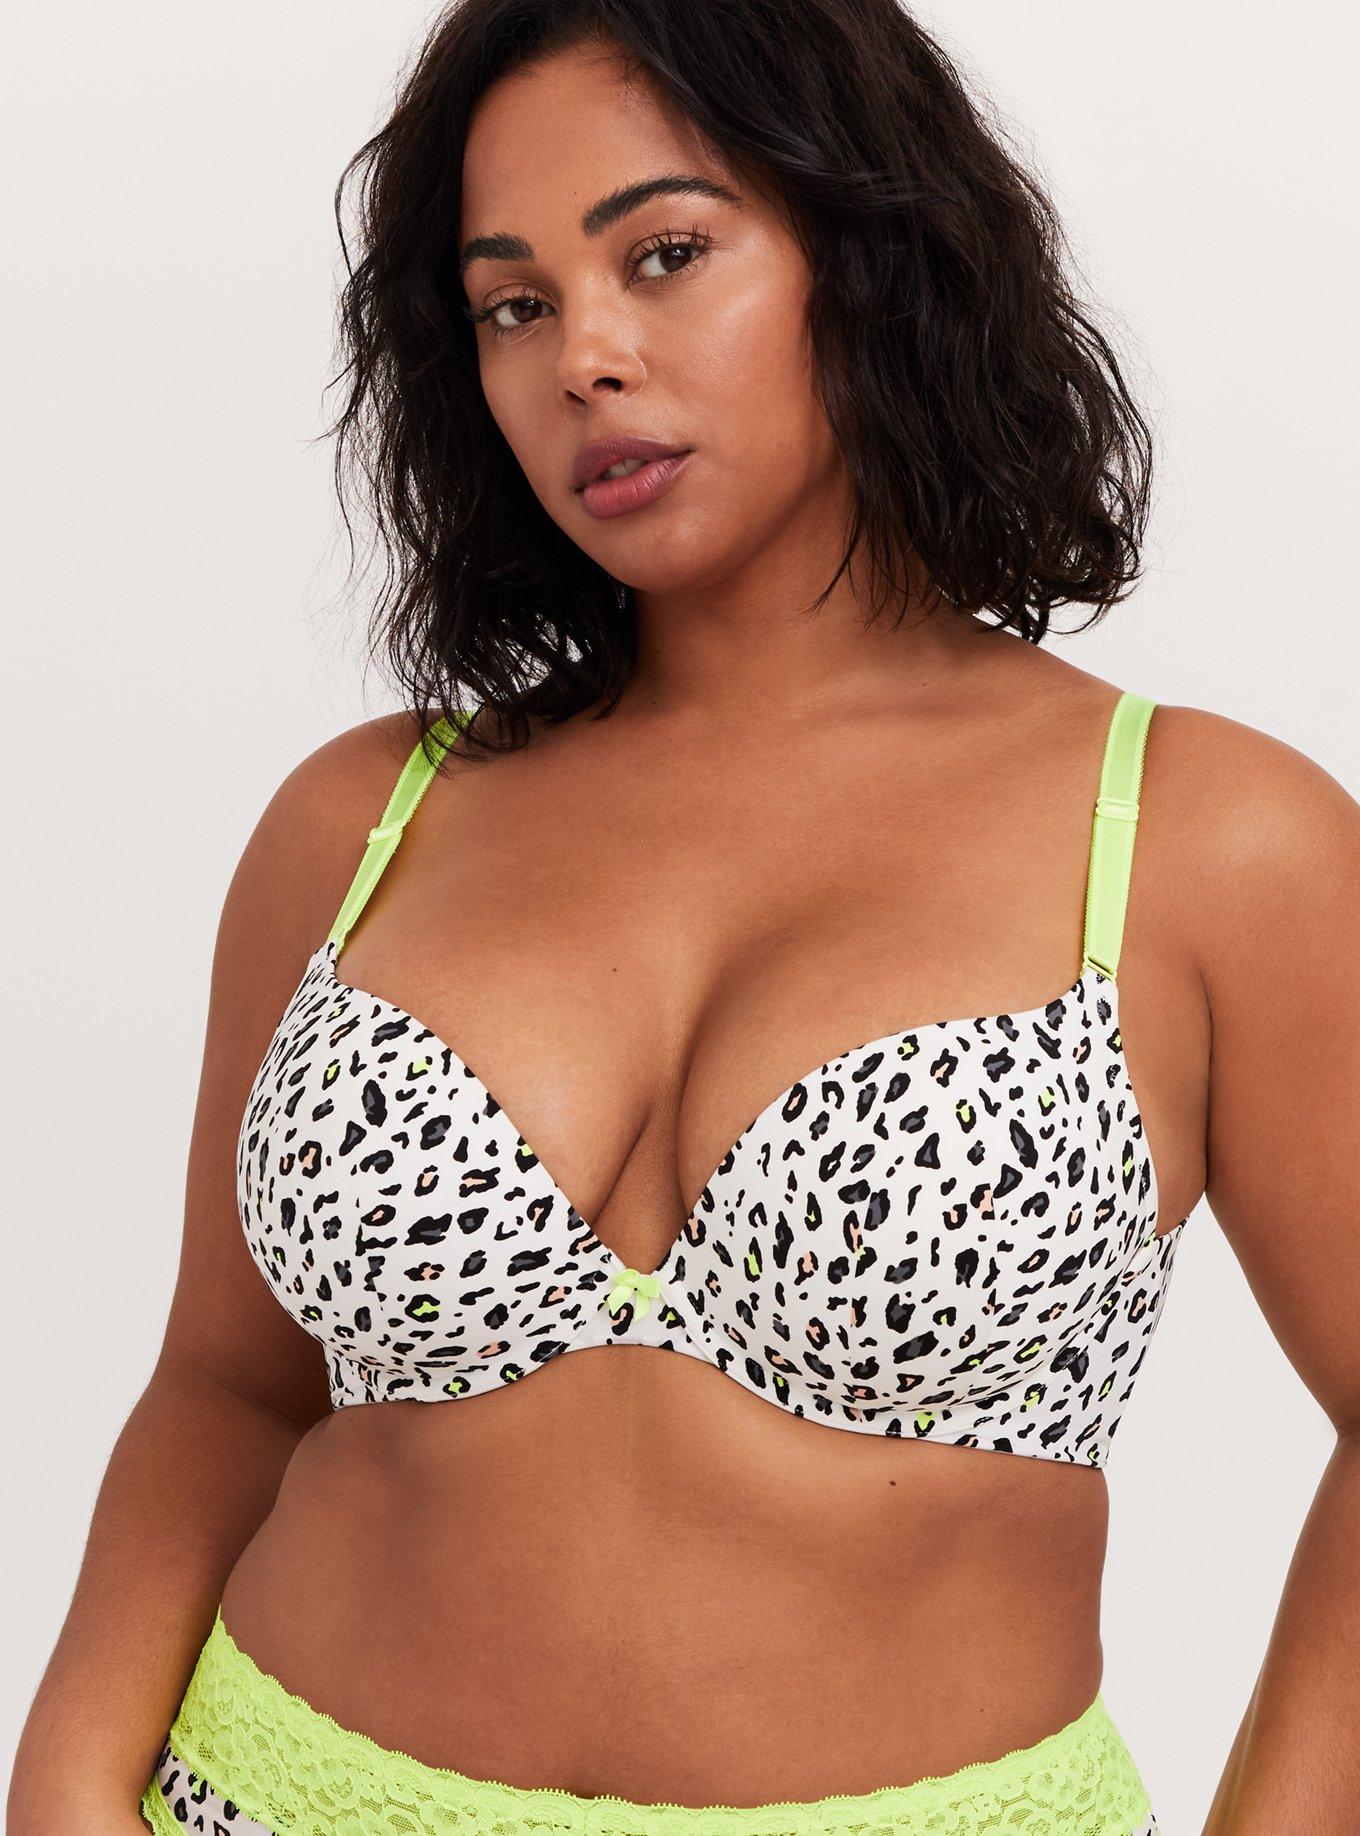 Torrid - Sexy Sale STARTS NOW! 40% off all bras when you buy 3 or